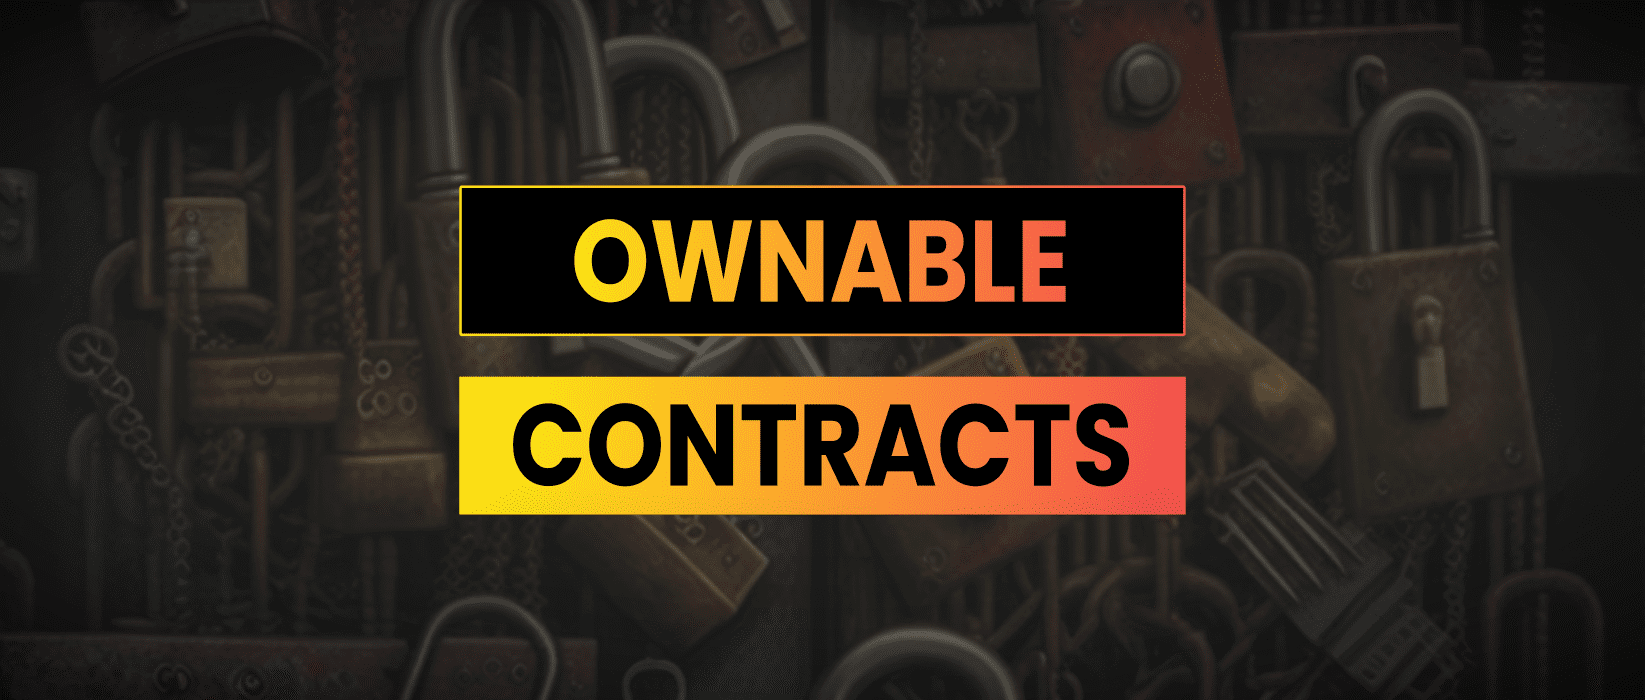 Ownable Contracts | Solidity Tips & Examples